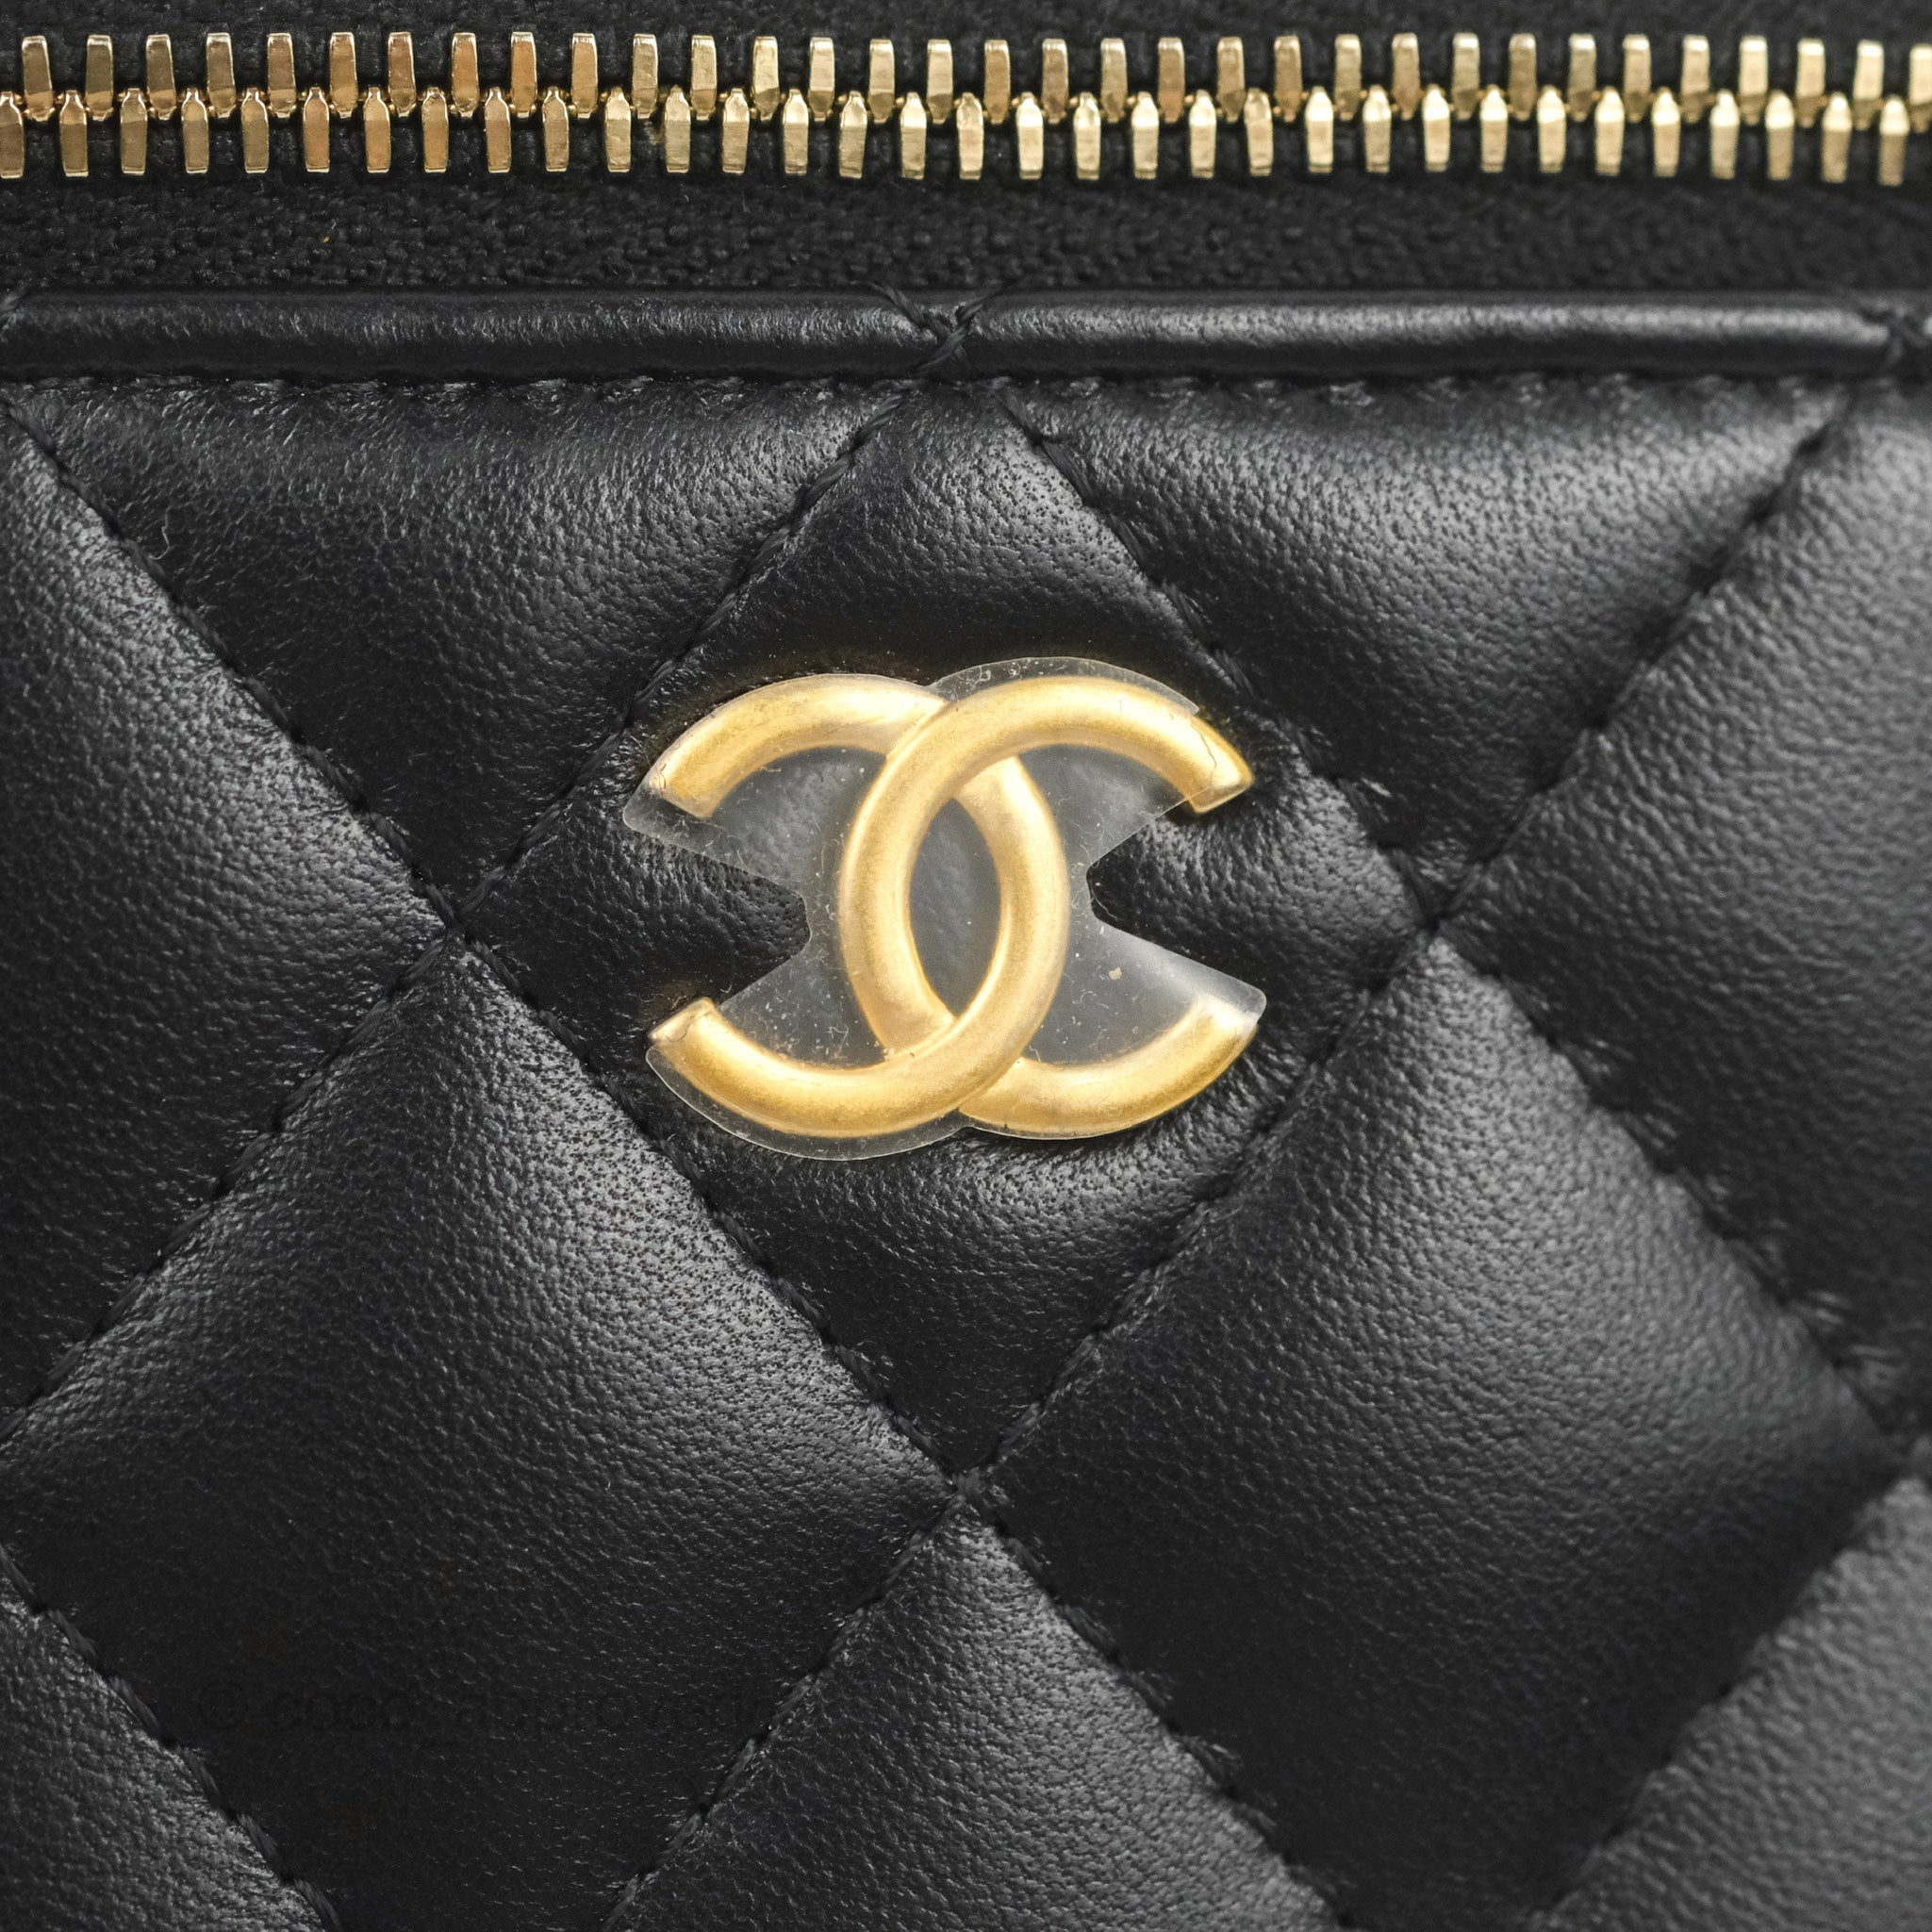 CHANEL 24K Gold-plated Hardware – Coco Approved Studio